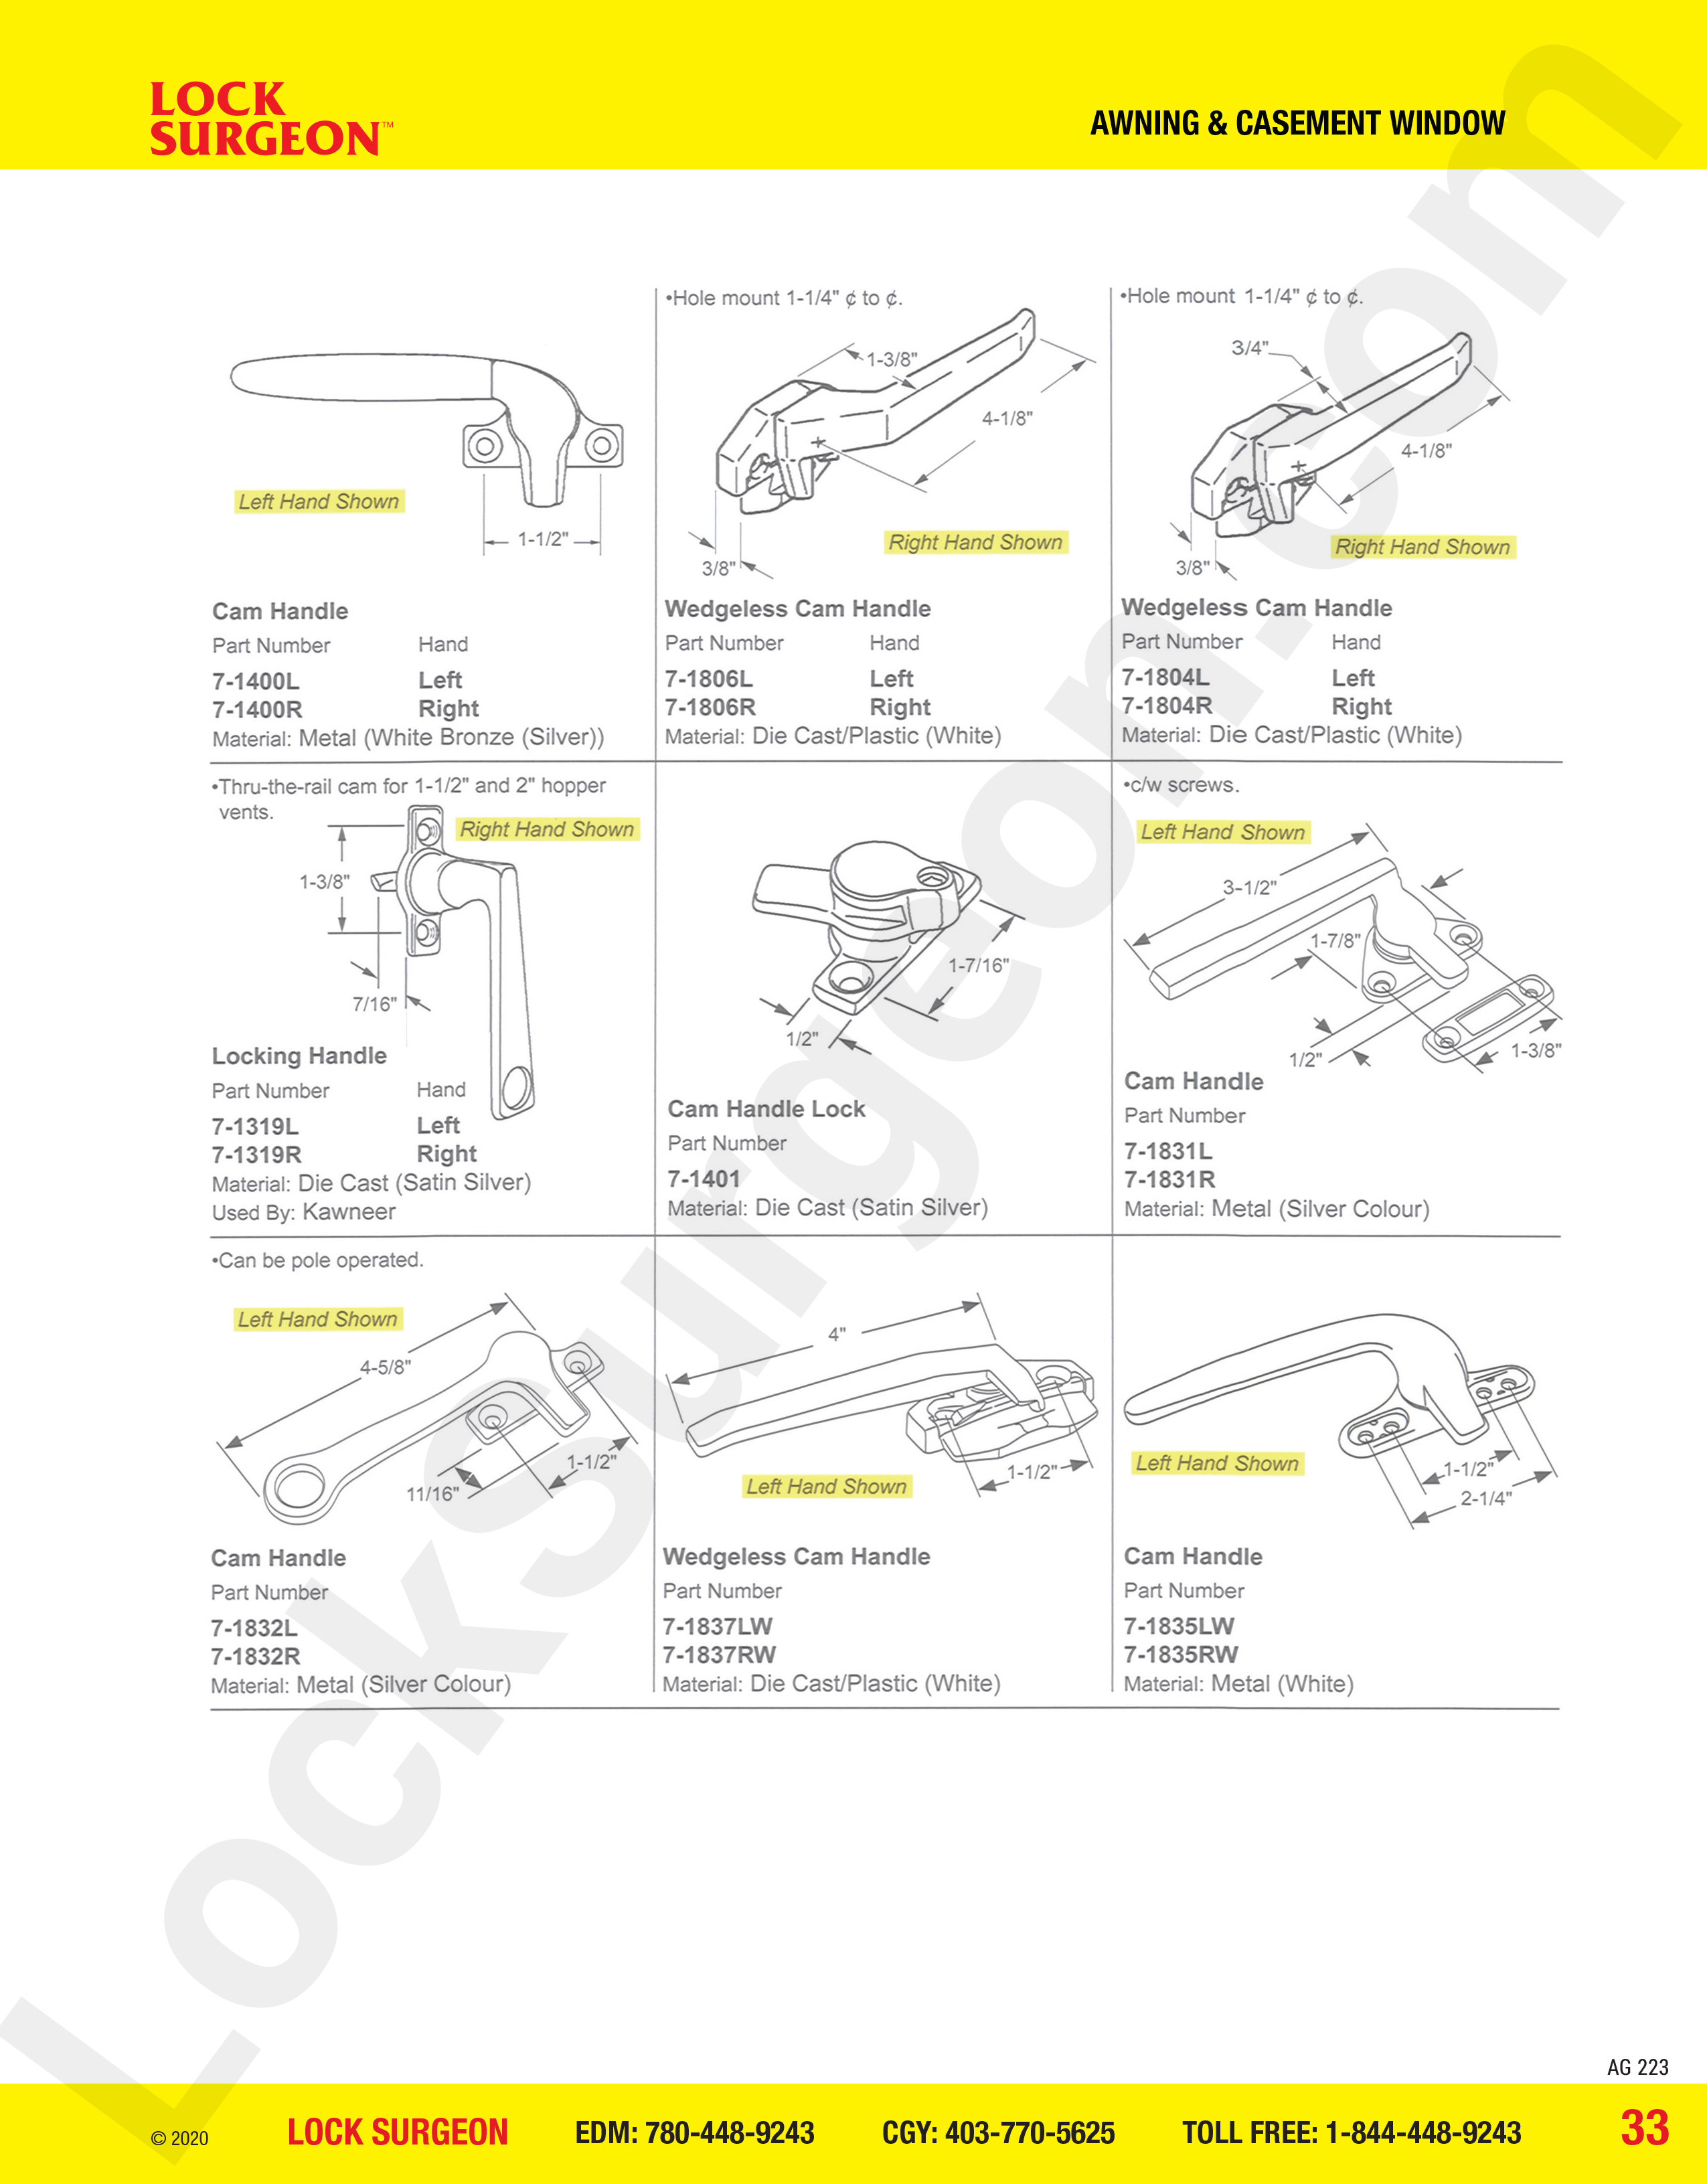 Acheson mobile awning and casement window parts for cam handles and locks